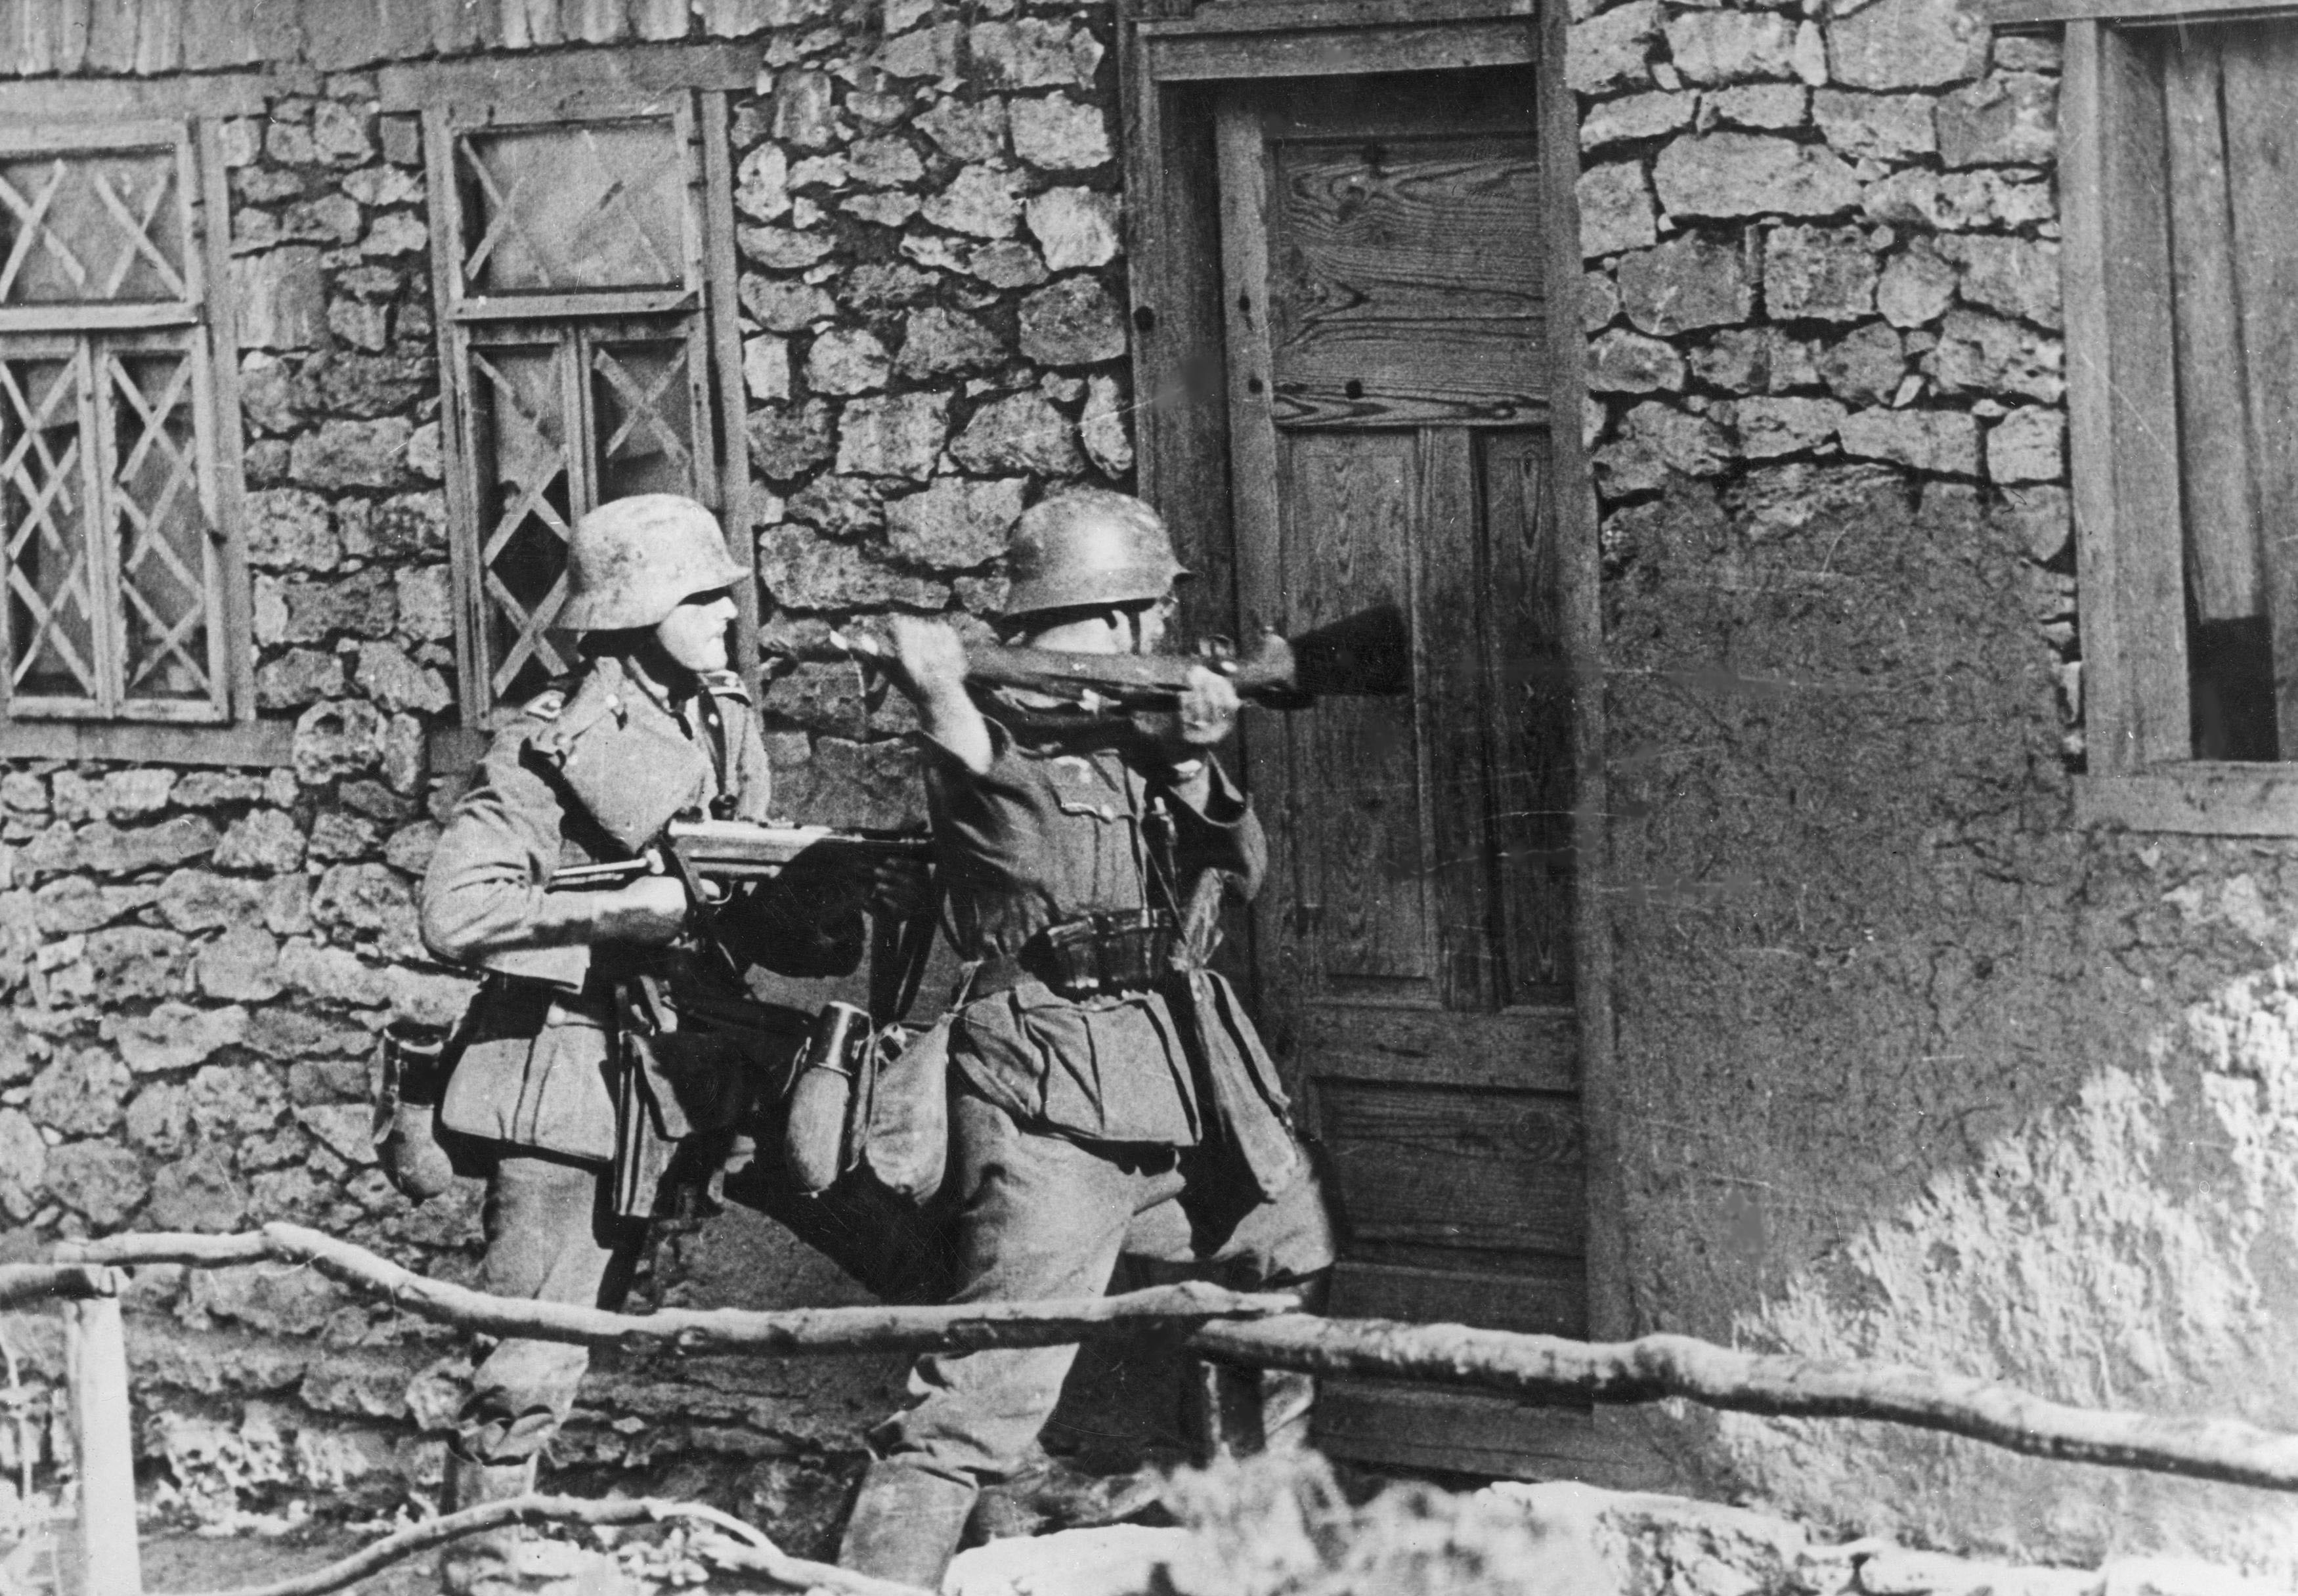 German soldiers attempt to break into a building on the Eastern Front c. 1941. Similarly to the soldier in this photo, German troops reaching the Catherine Palace in September 1941 used rifle butts to smash pieces from the walls of the Amber Room. / Polish State Archive